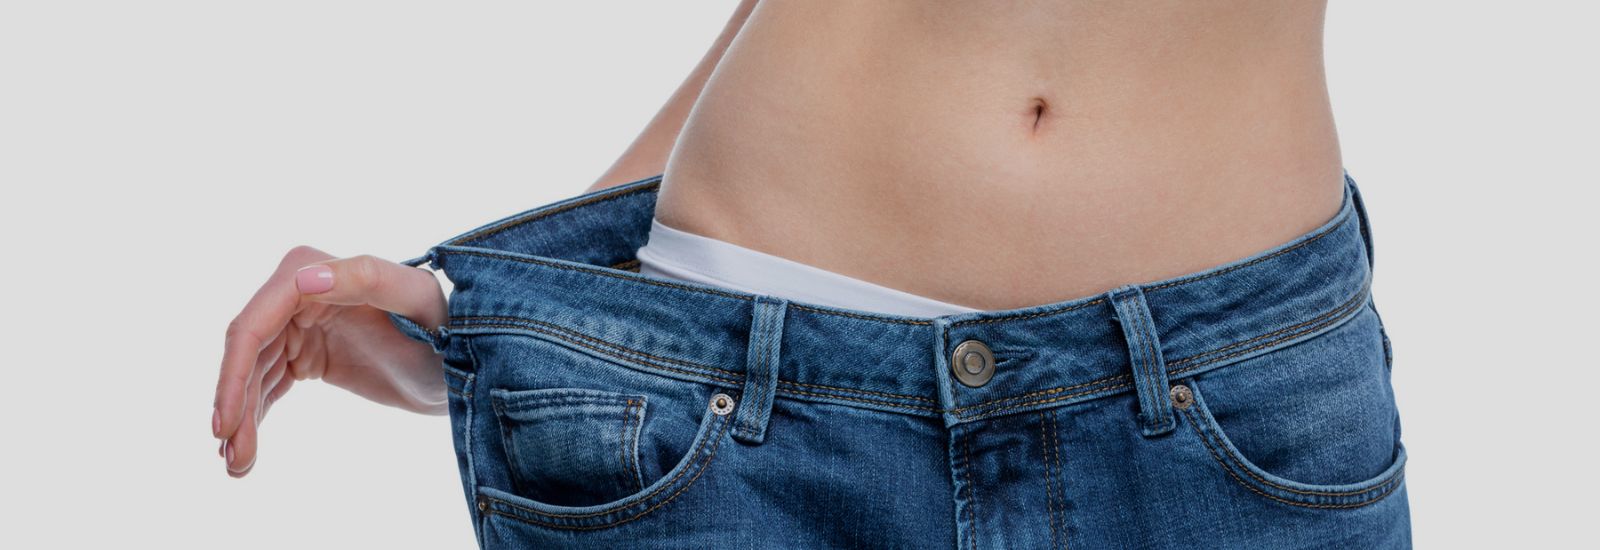 A person is wearing jeans and has their stomach in the pocket.